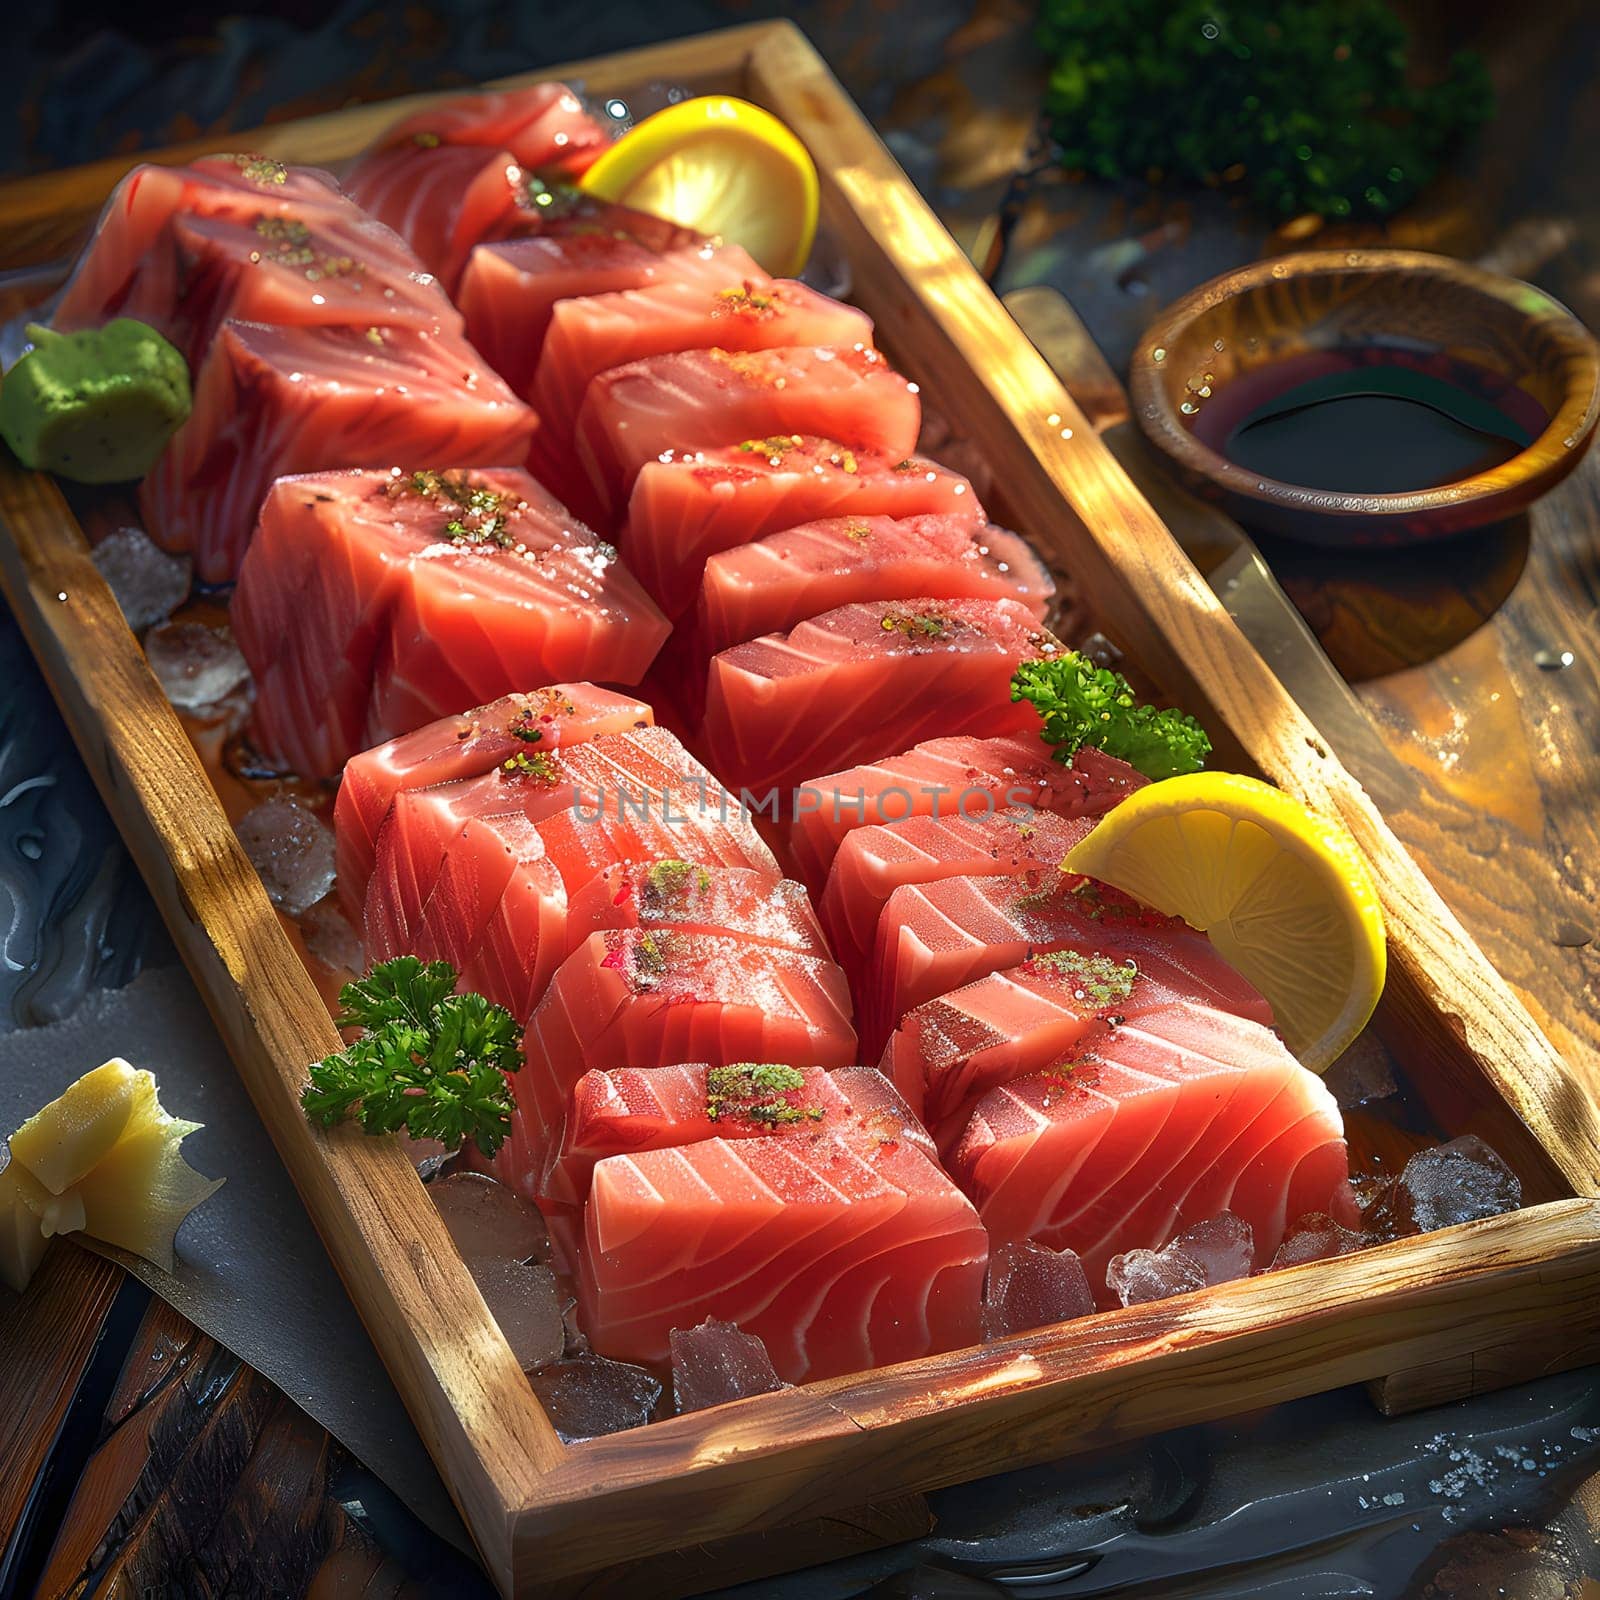 A wooden tray with slices of meat and lemon, perfect for a refreshing seafood dish. Ideal for a summer cookout with friends and family